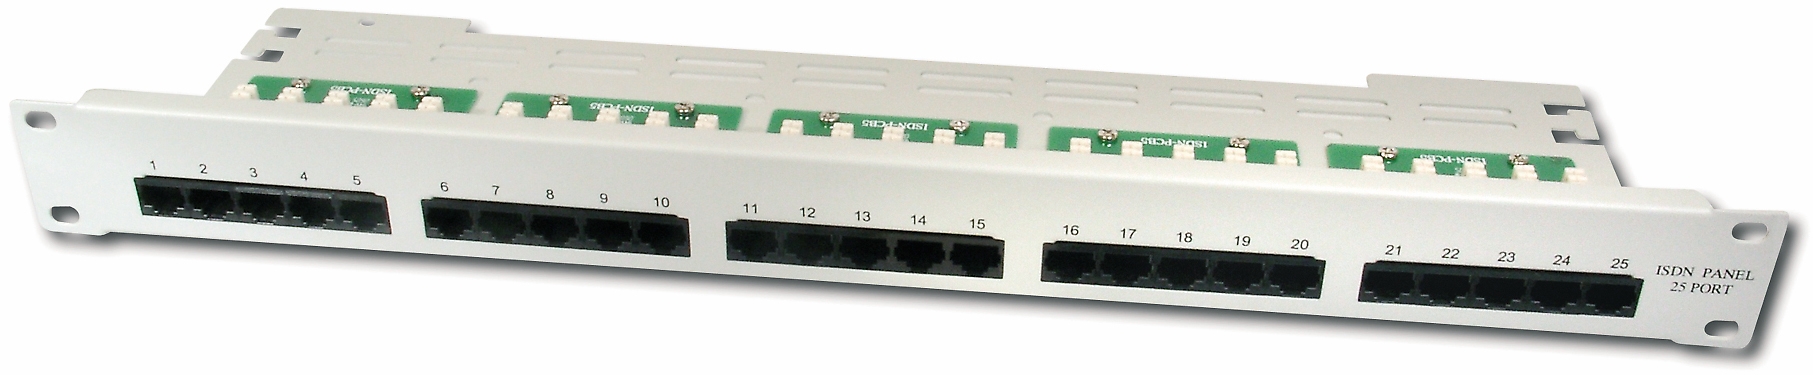 Patchpanel 19"  25 Port  1HE  ISDN  4-fach belegt